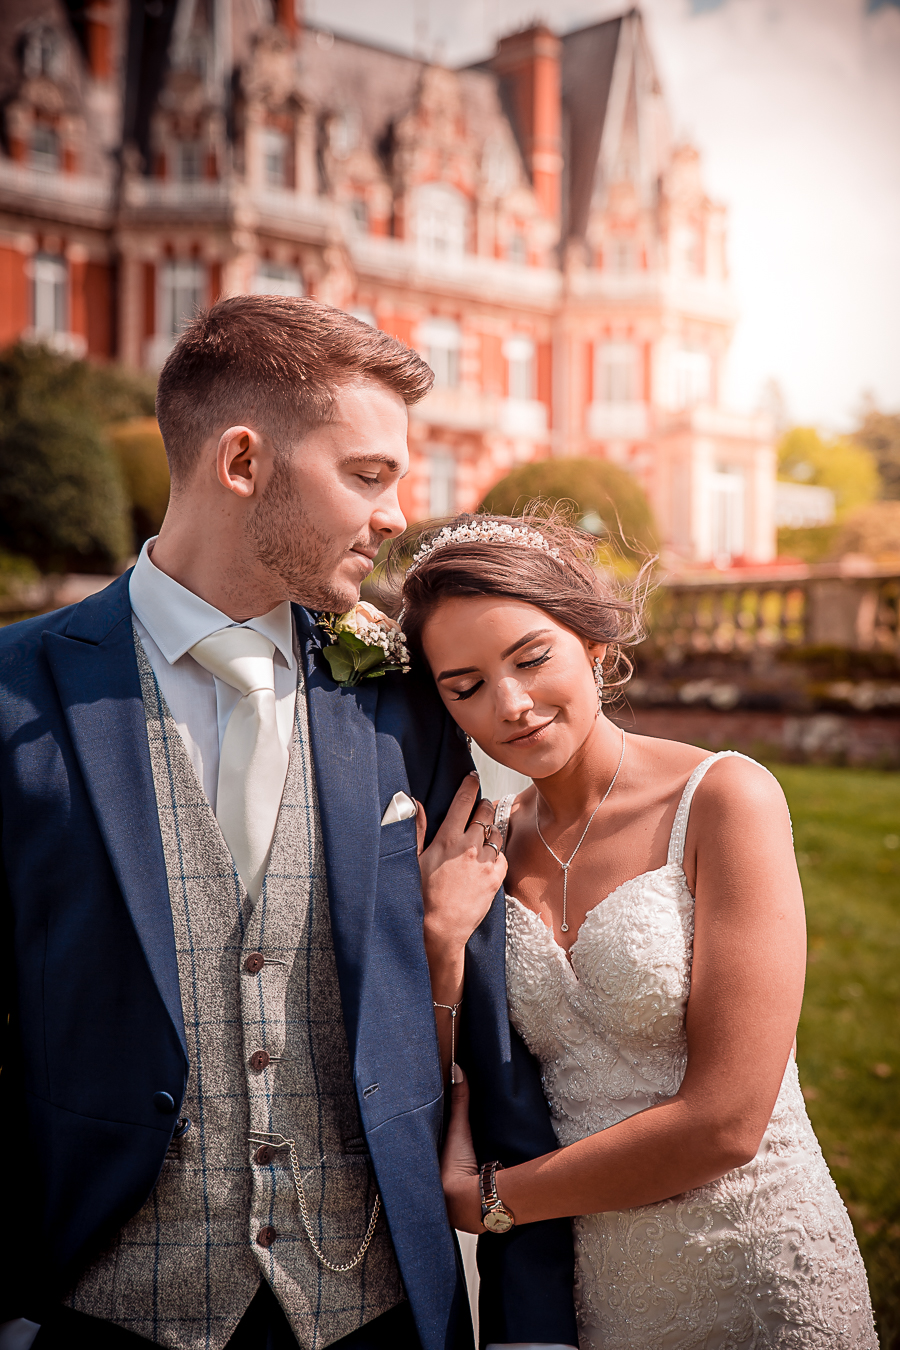 Real wedding at Chateau Impney classic glamorous style, Nicholas Rogers Photography (18)